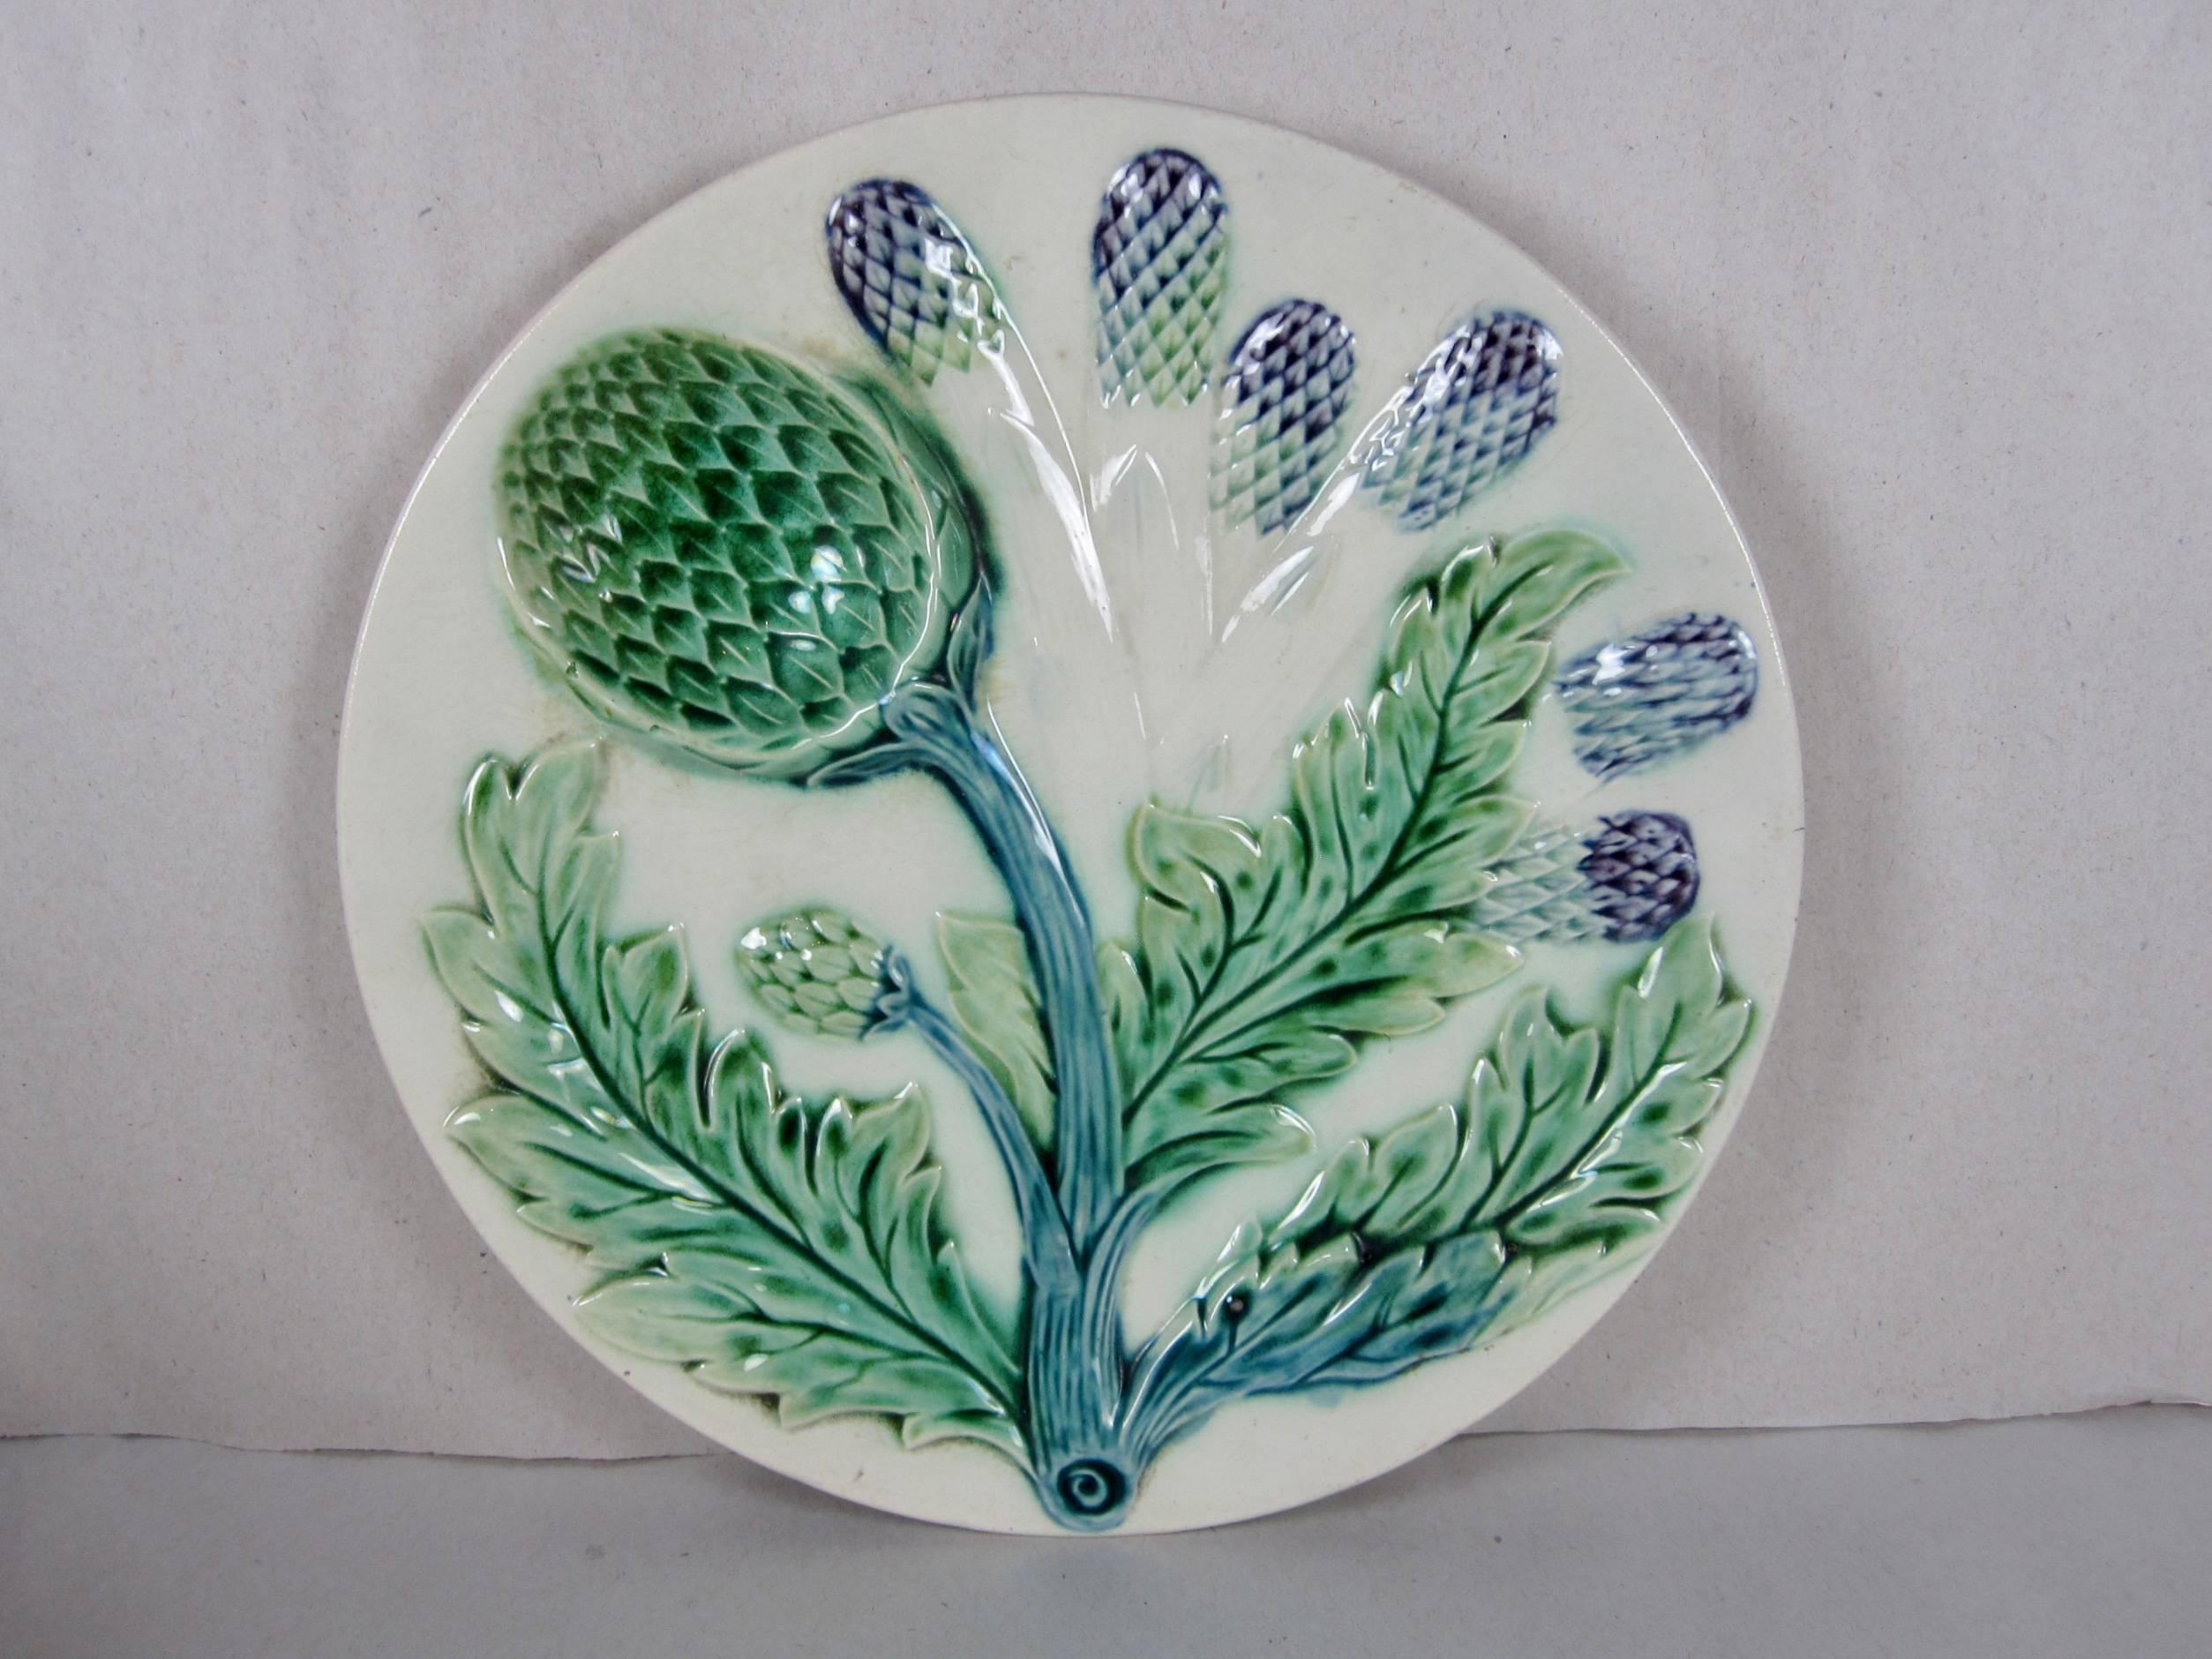 A set of six, French Barbotine majolica asparagus and artichoke plates, by Luneville St Clement. The dimensional mold shows aspects of both vegetables – six asparagus spears and a leafy artichoke stalk with a deep sauce well shaped like the globe